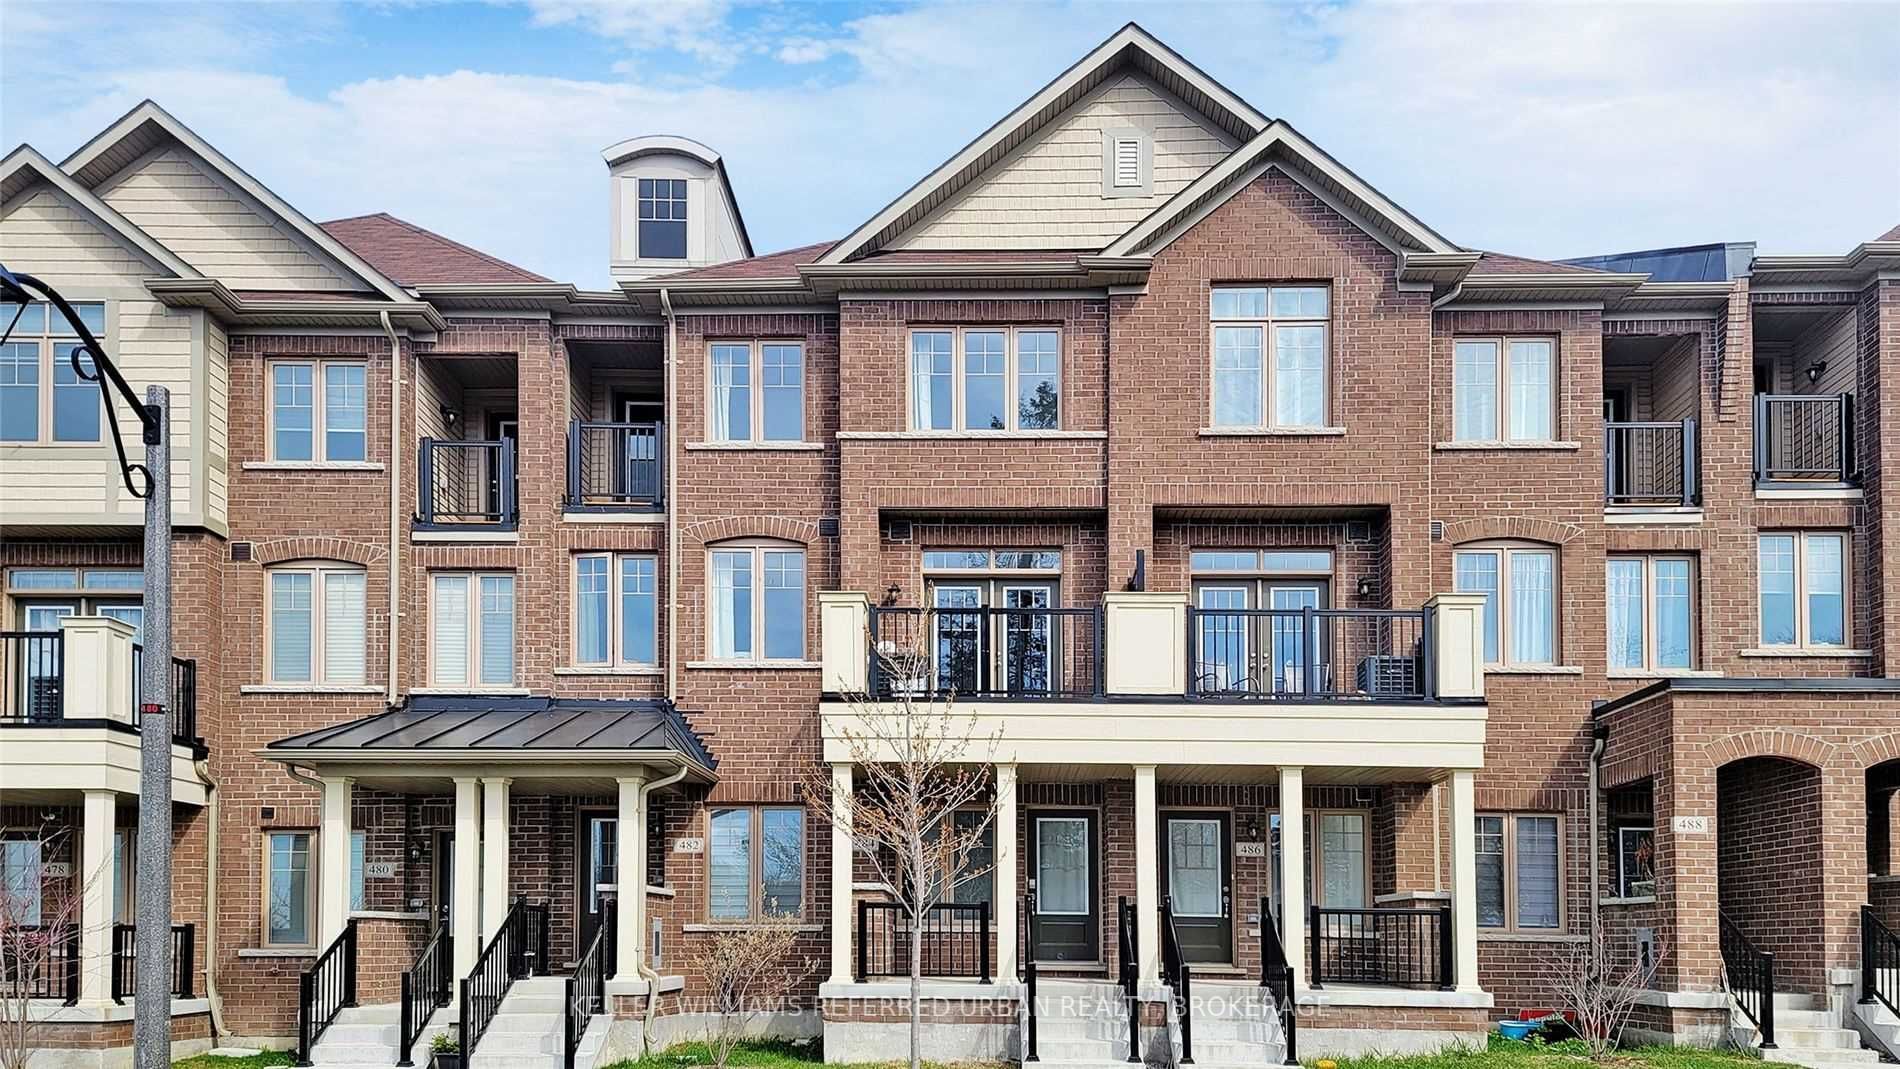 New property listed in Cornell, Markham